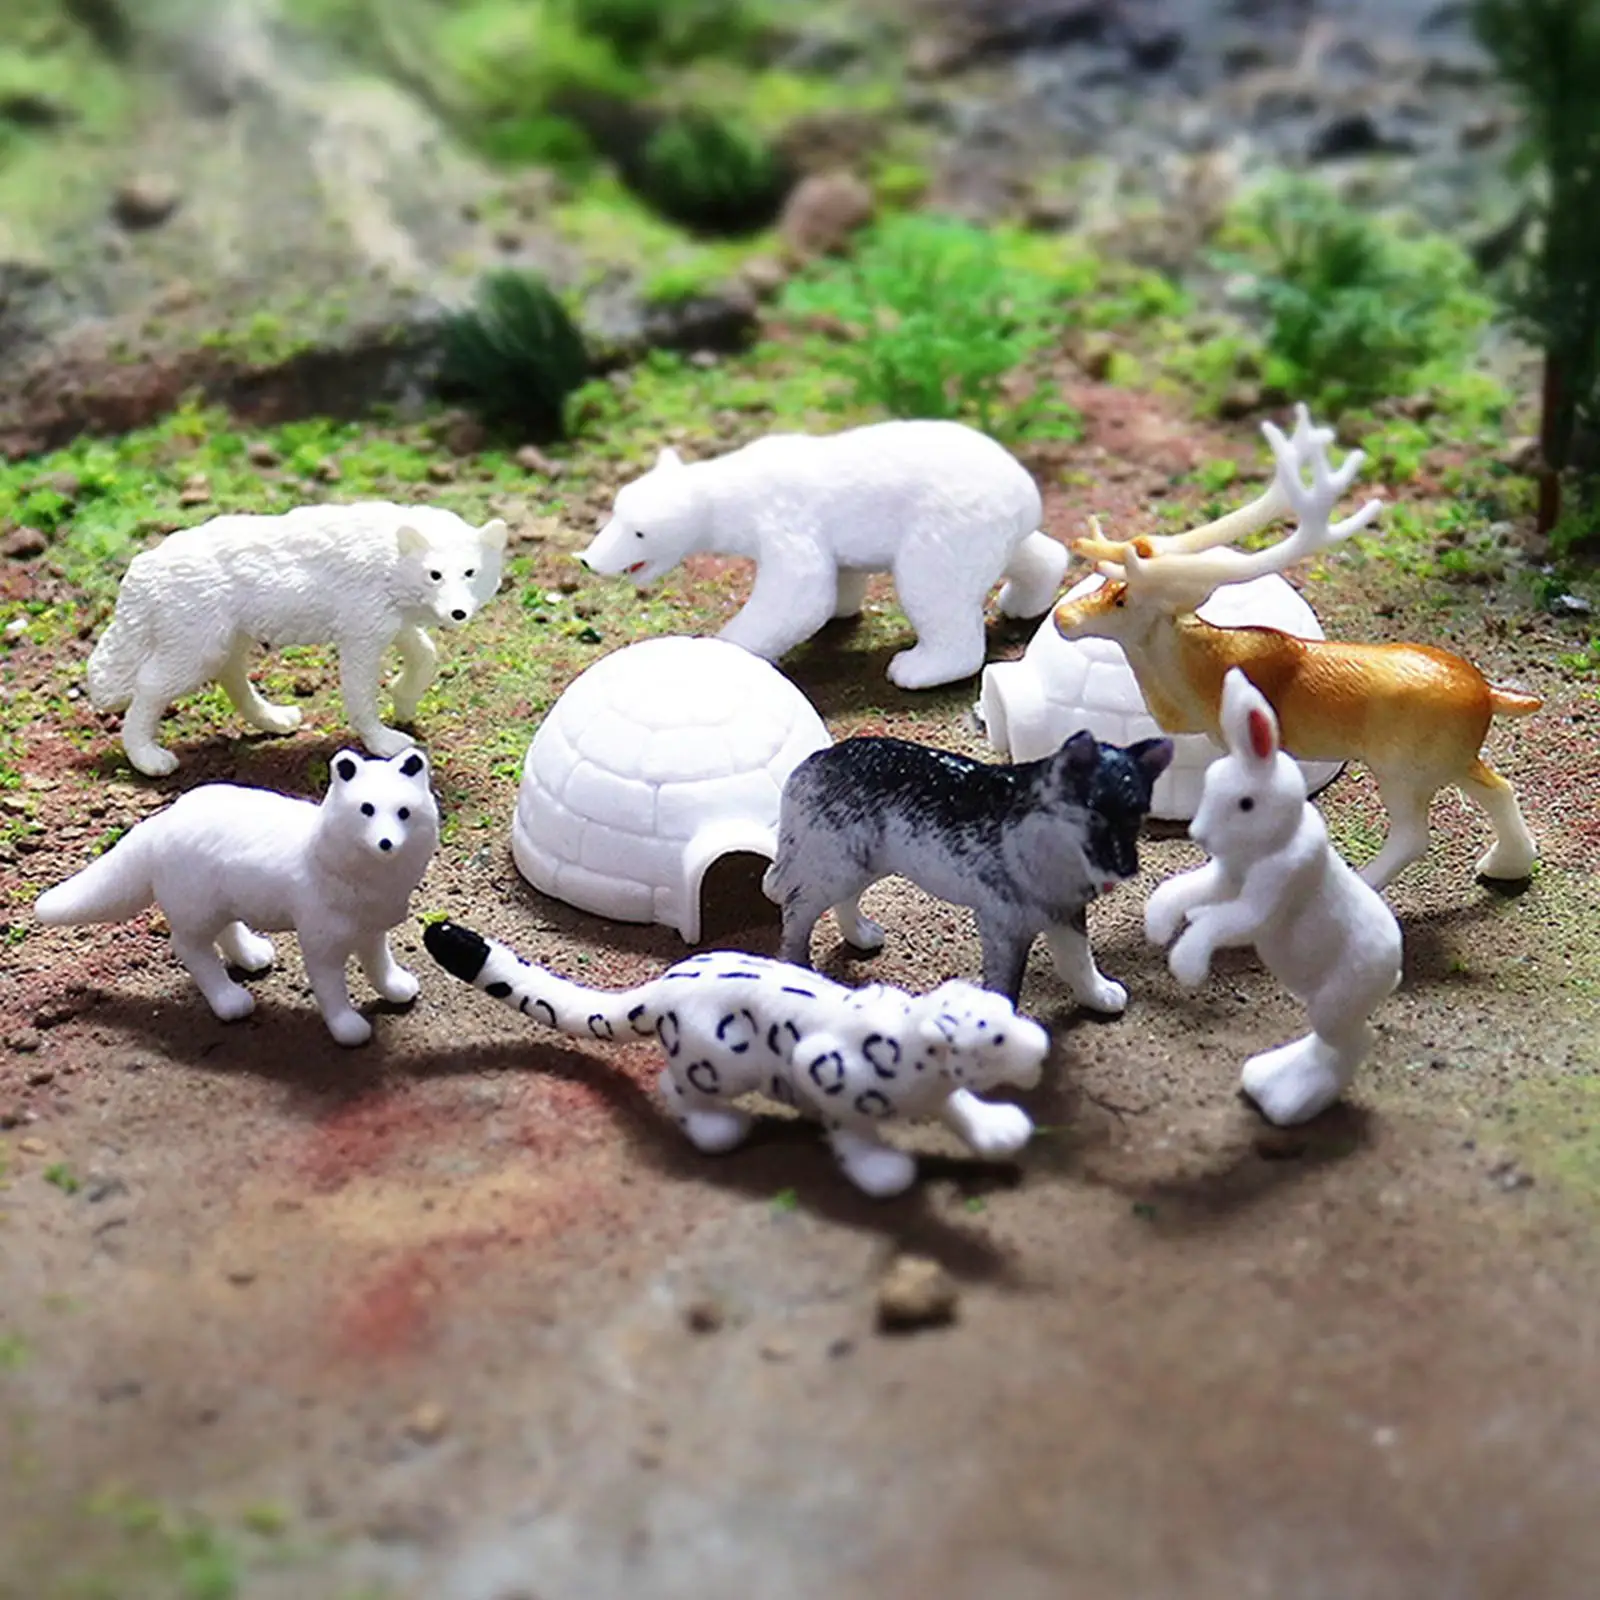 Realistic Arctic Animal Model Miniature Statues Small Plastic Playset Toys for